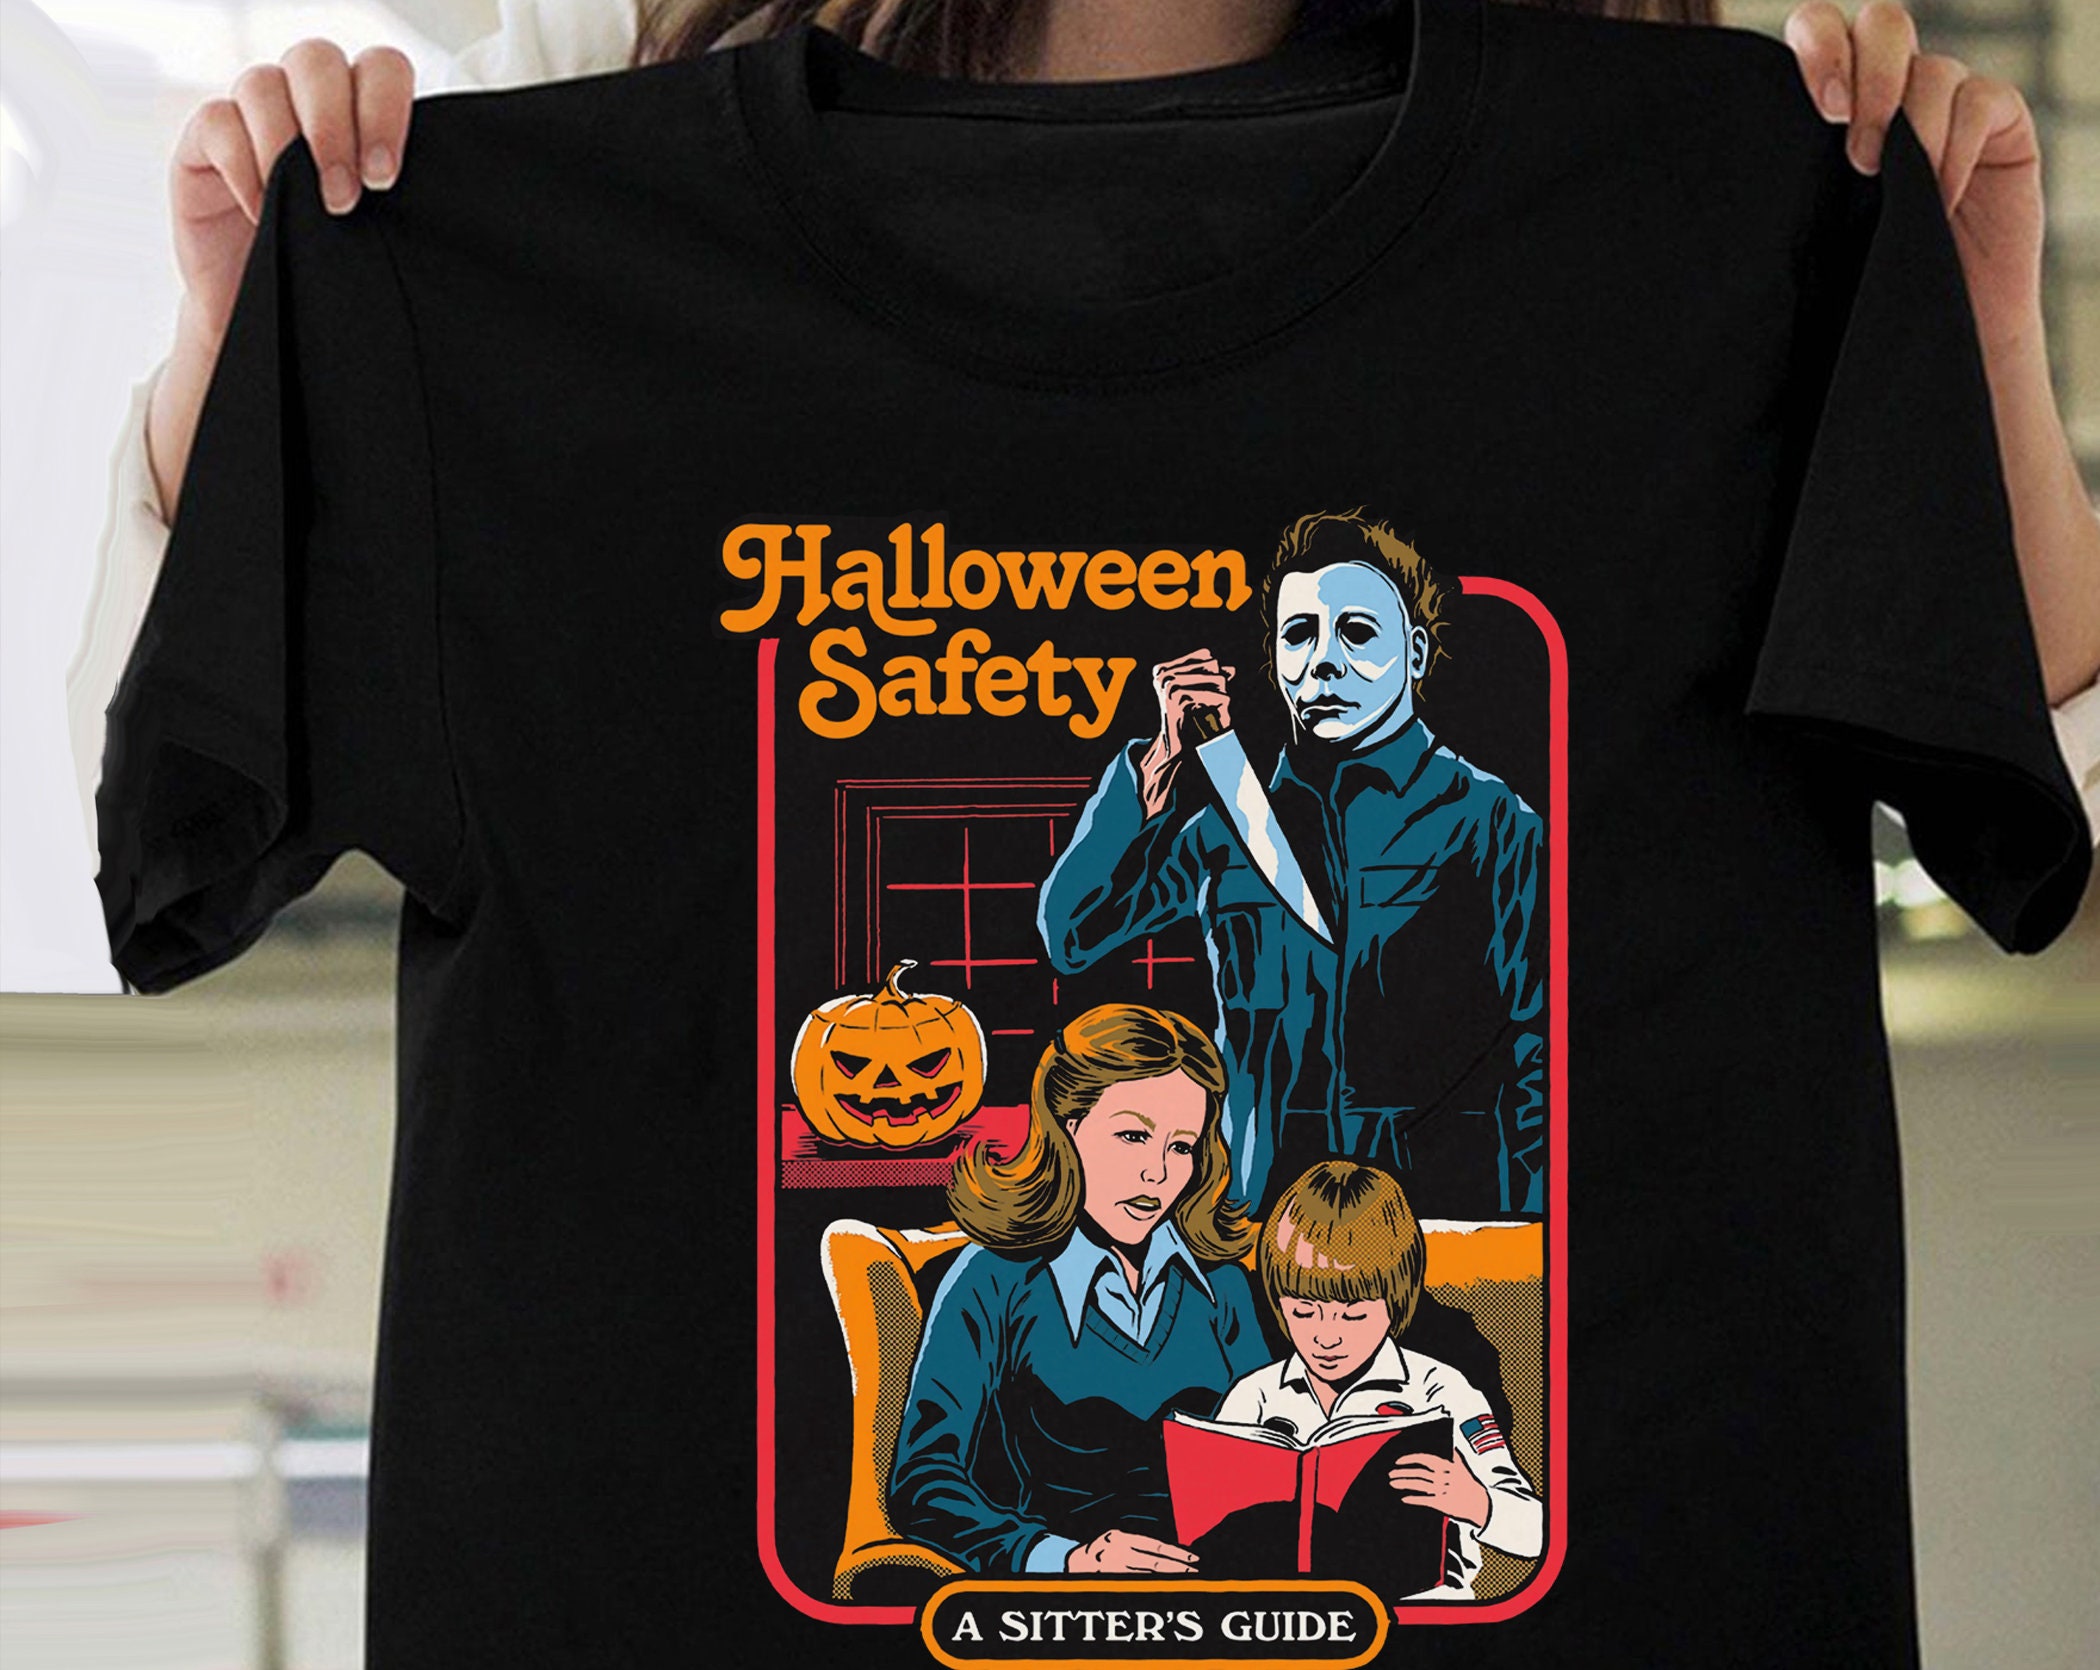 Michael Myers Halloween Safety A Sitter’s Guide Shirt